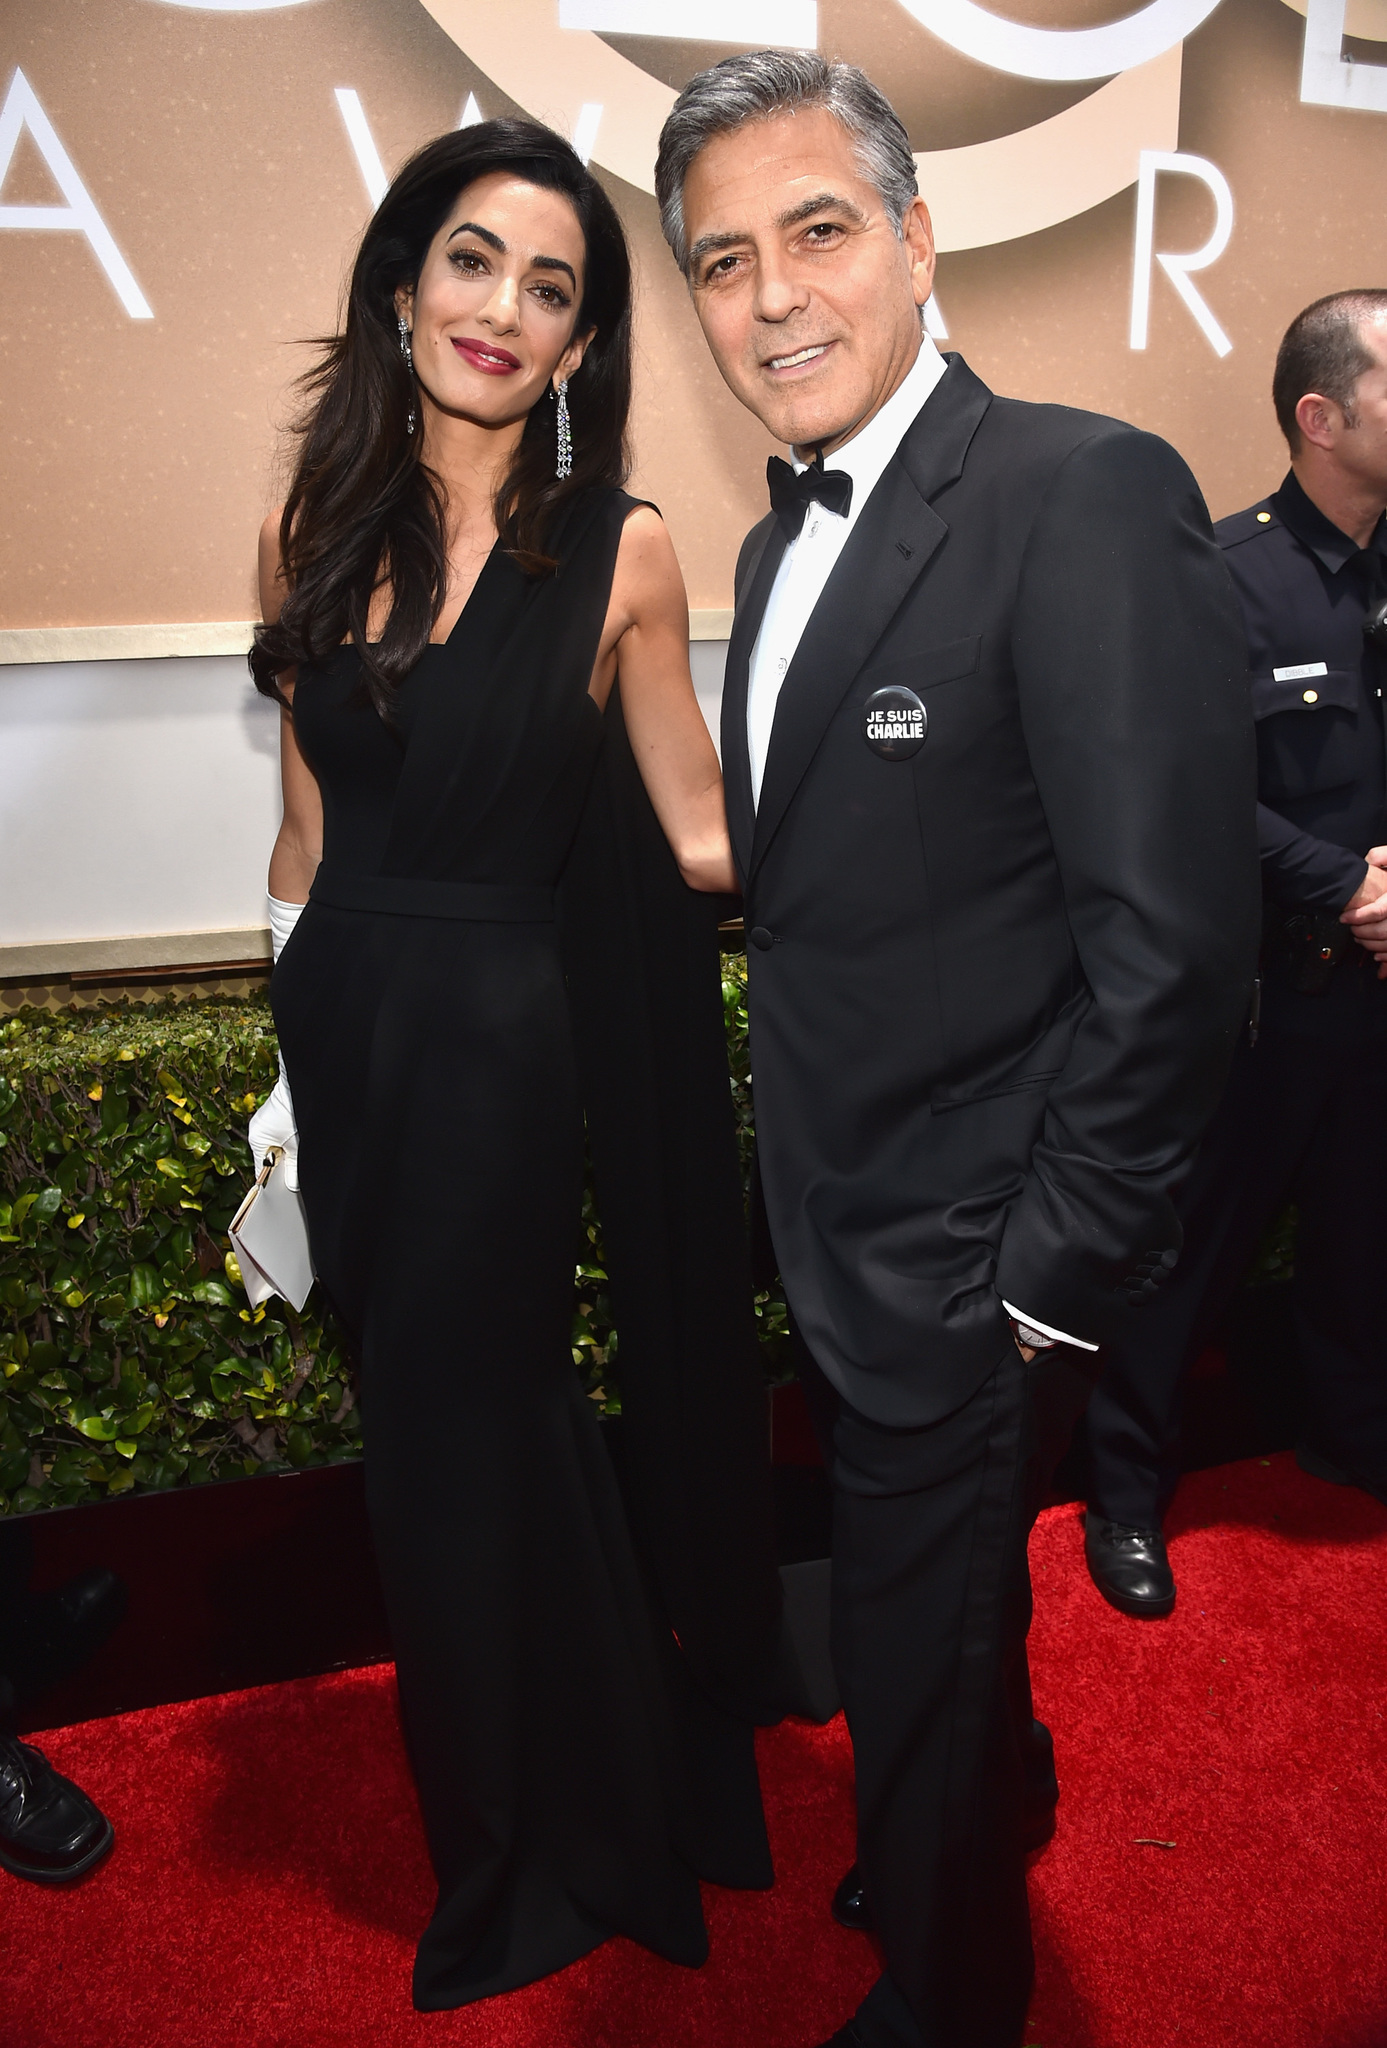 George Clooney and Amal Alamuddin at event of 72nd Golden Globe Awards (2015)